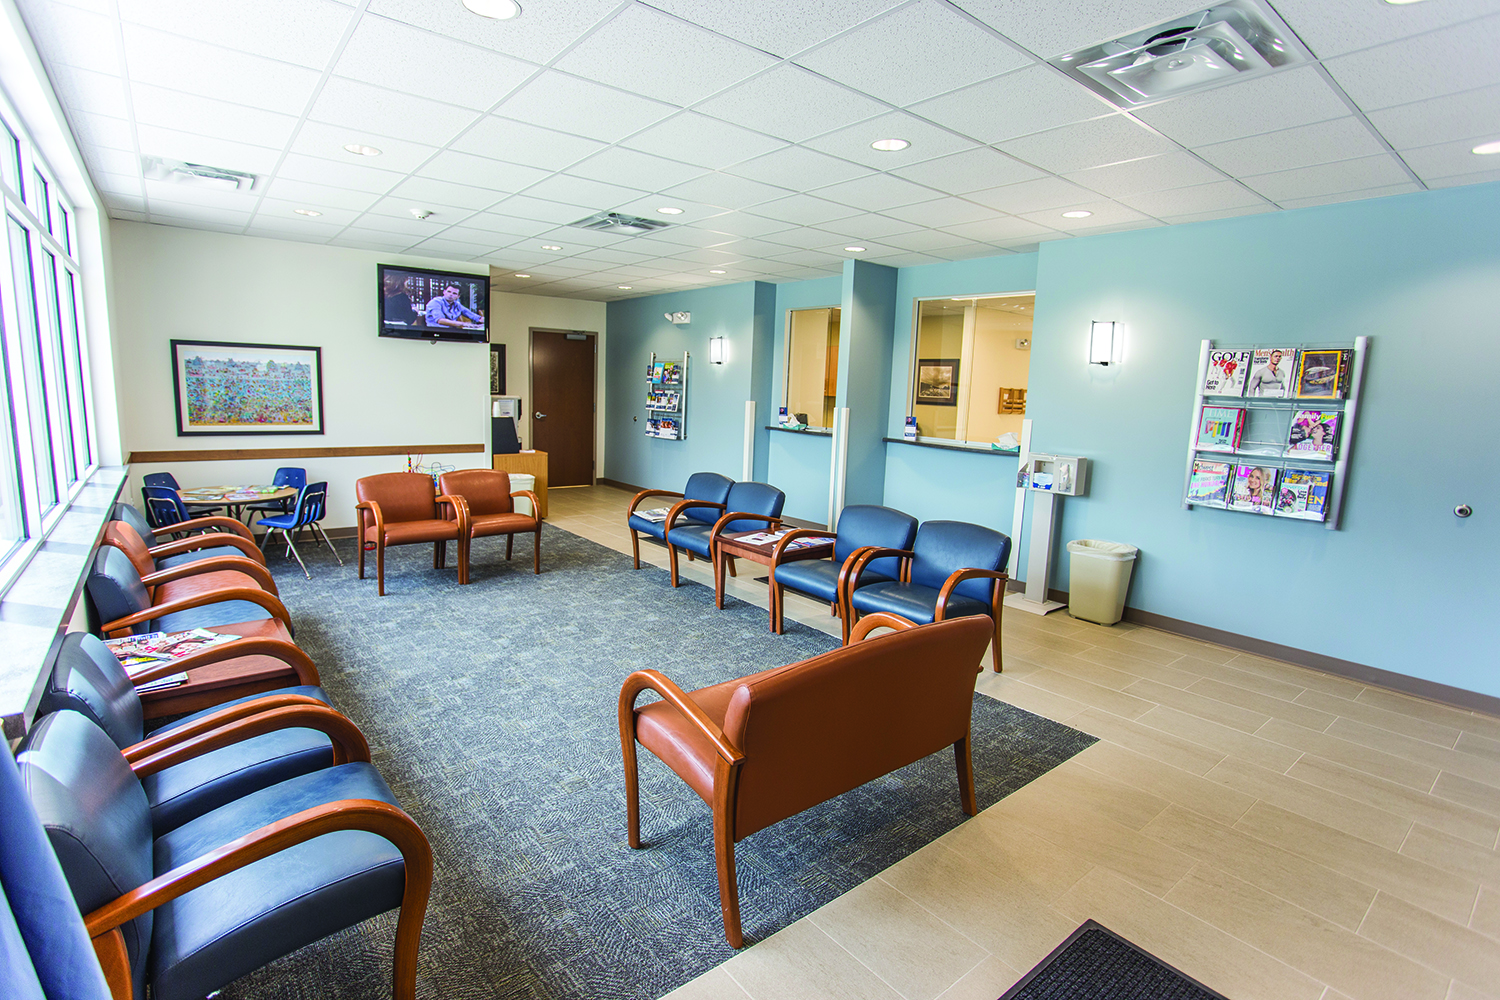 Select sconces provide stylish hospital lighting in a modern waiting room.